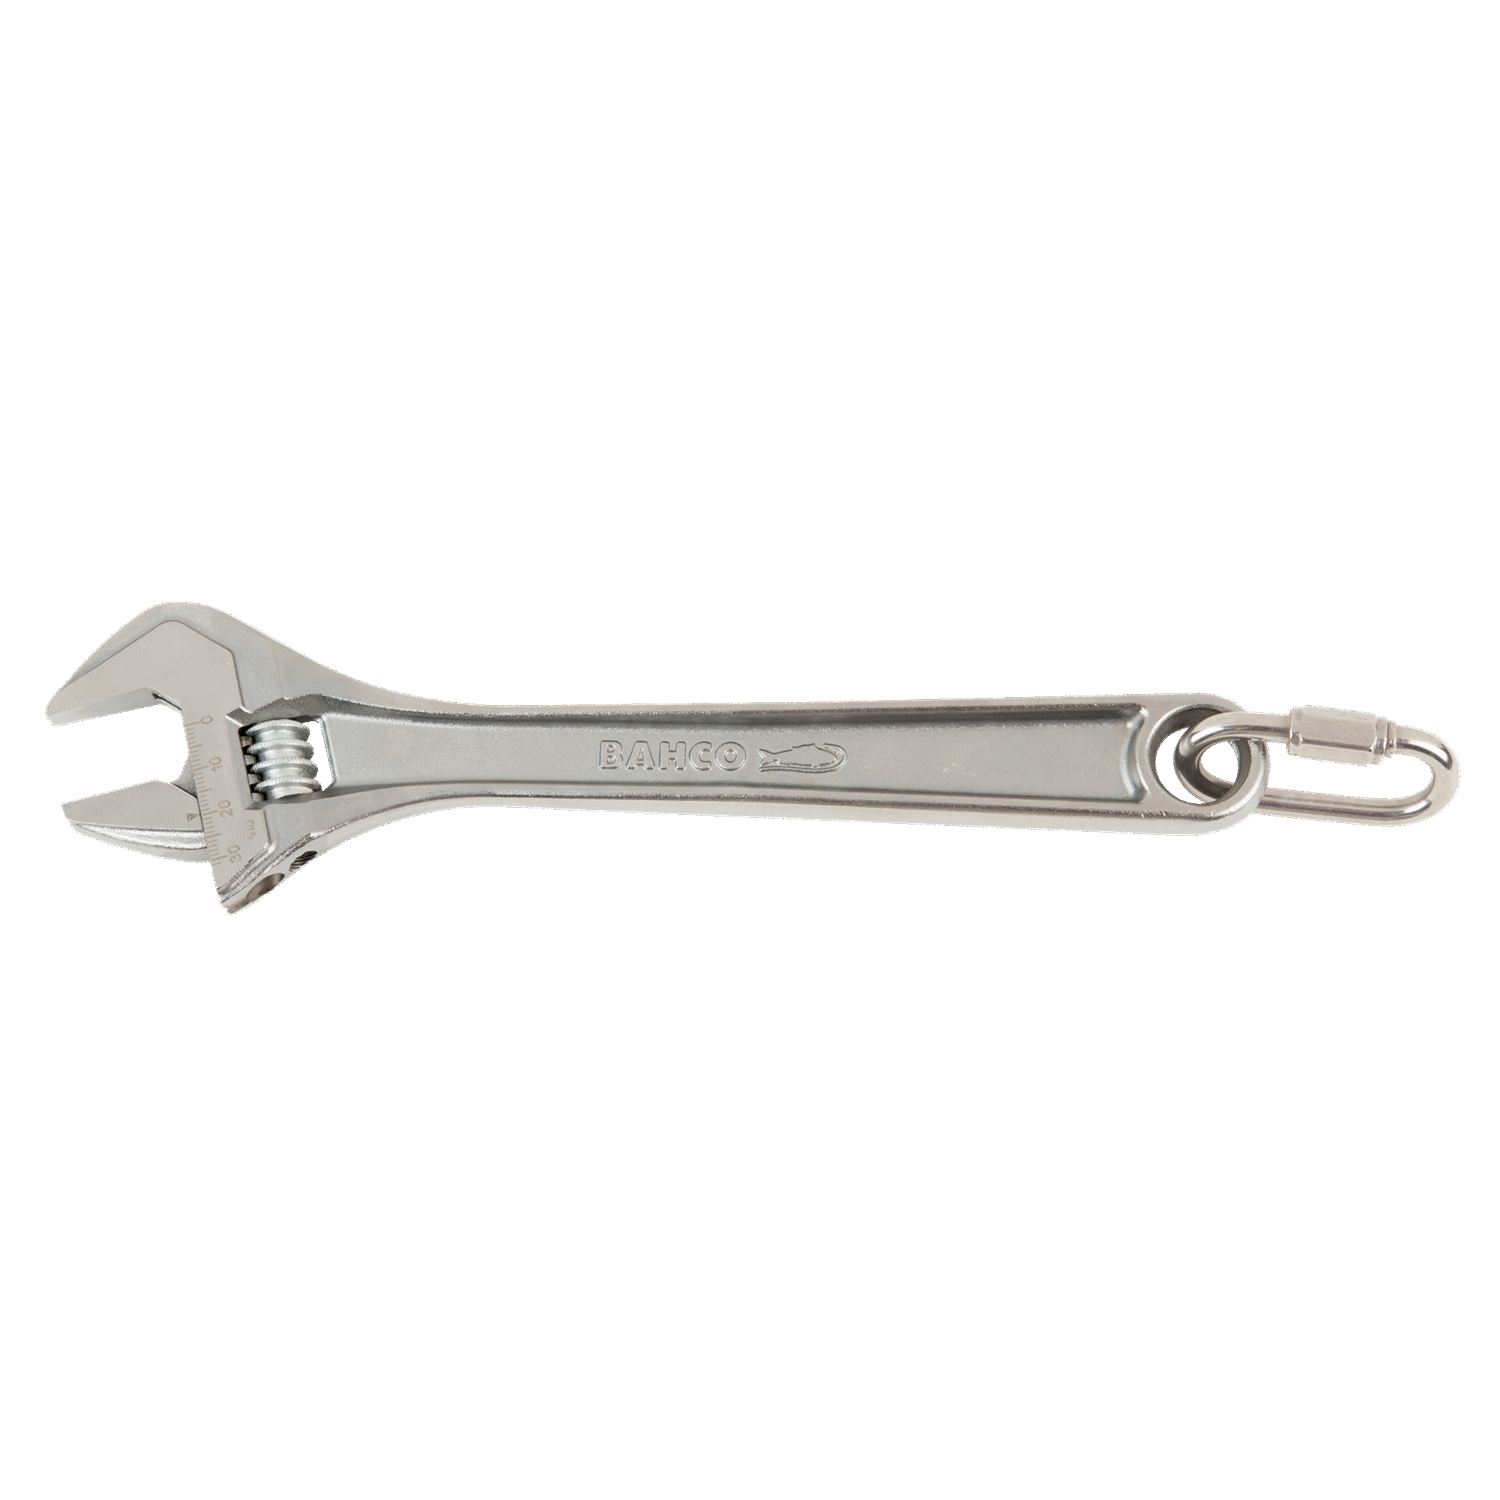 BAHCO 80TAH 80 Series Adjustable Wrench with Quick Link - Premium Adjustable Wrench from BAHCO - Shop now at Yew Aik.